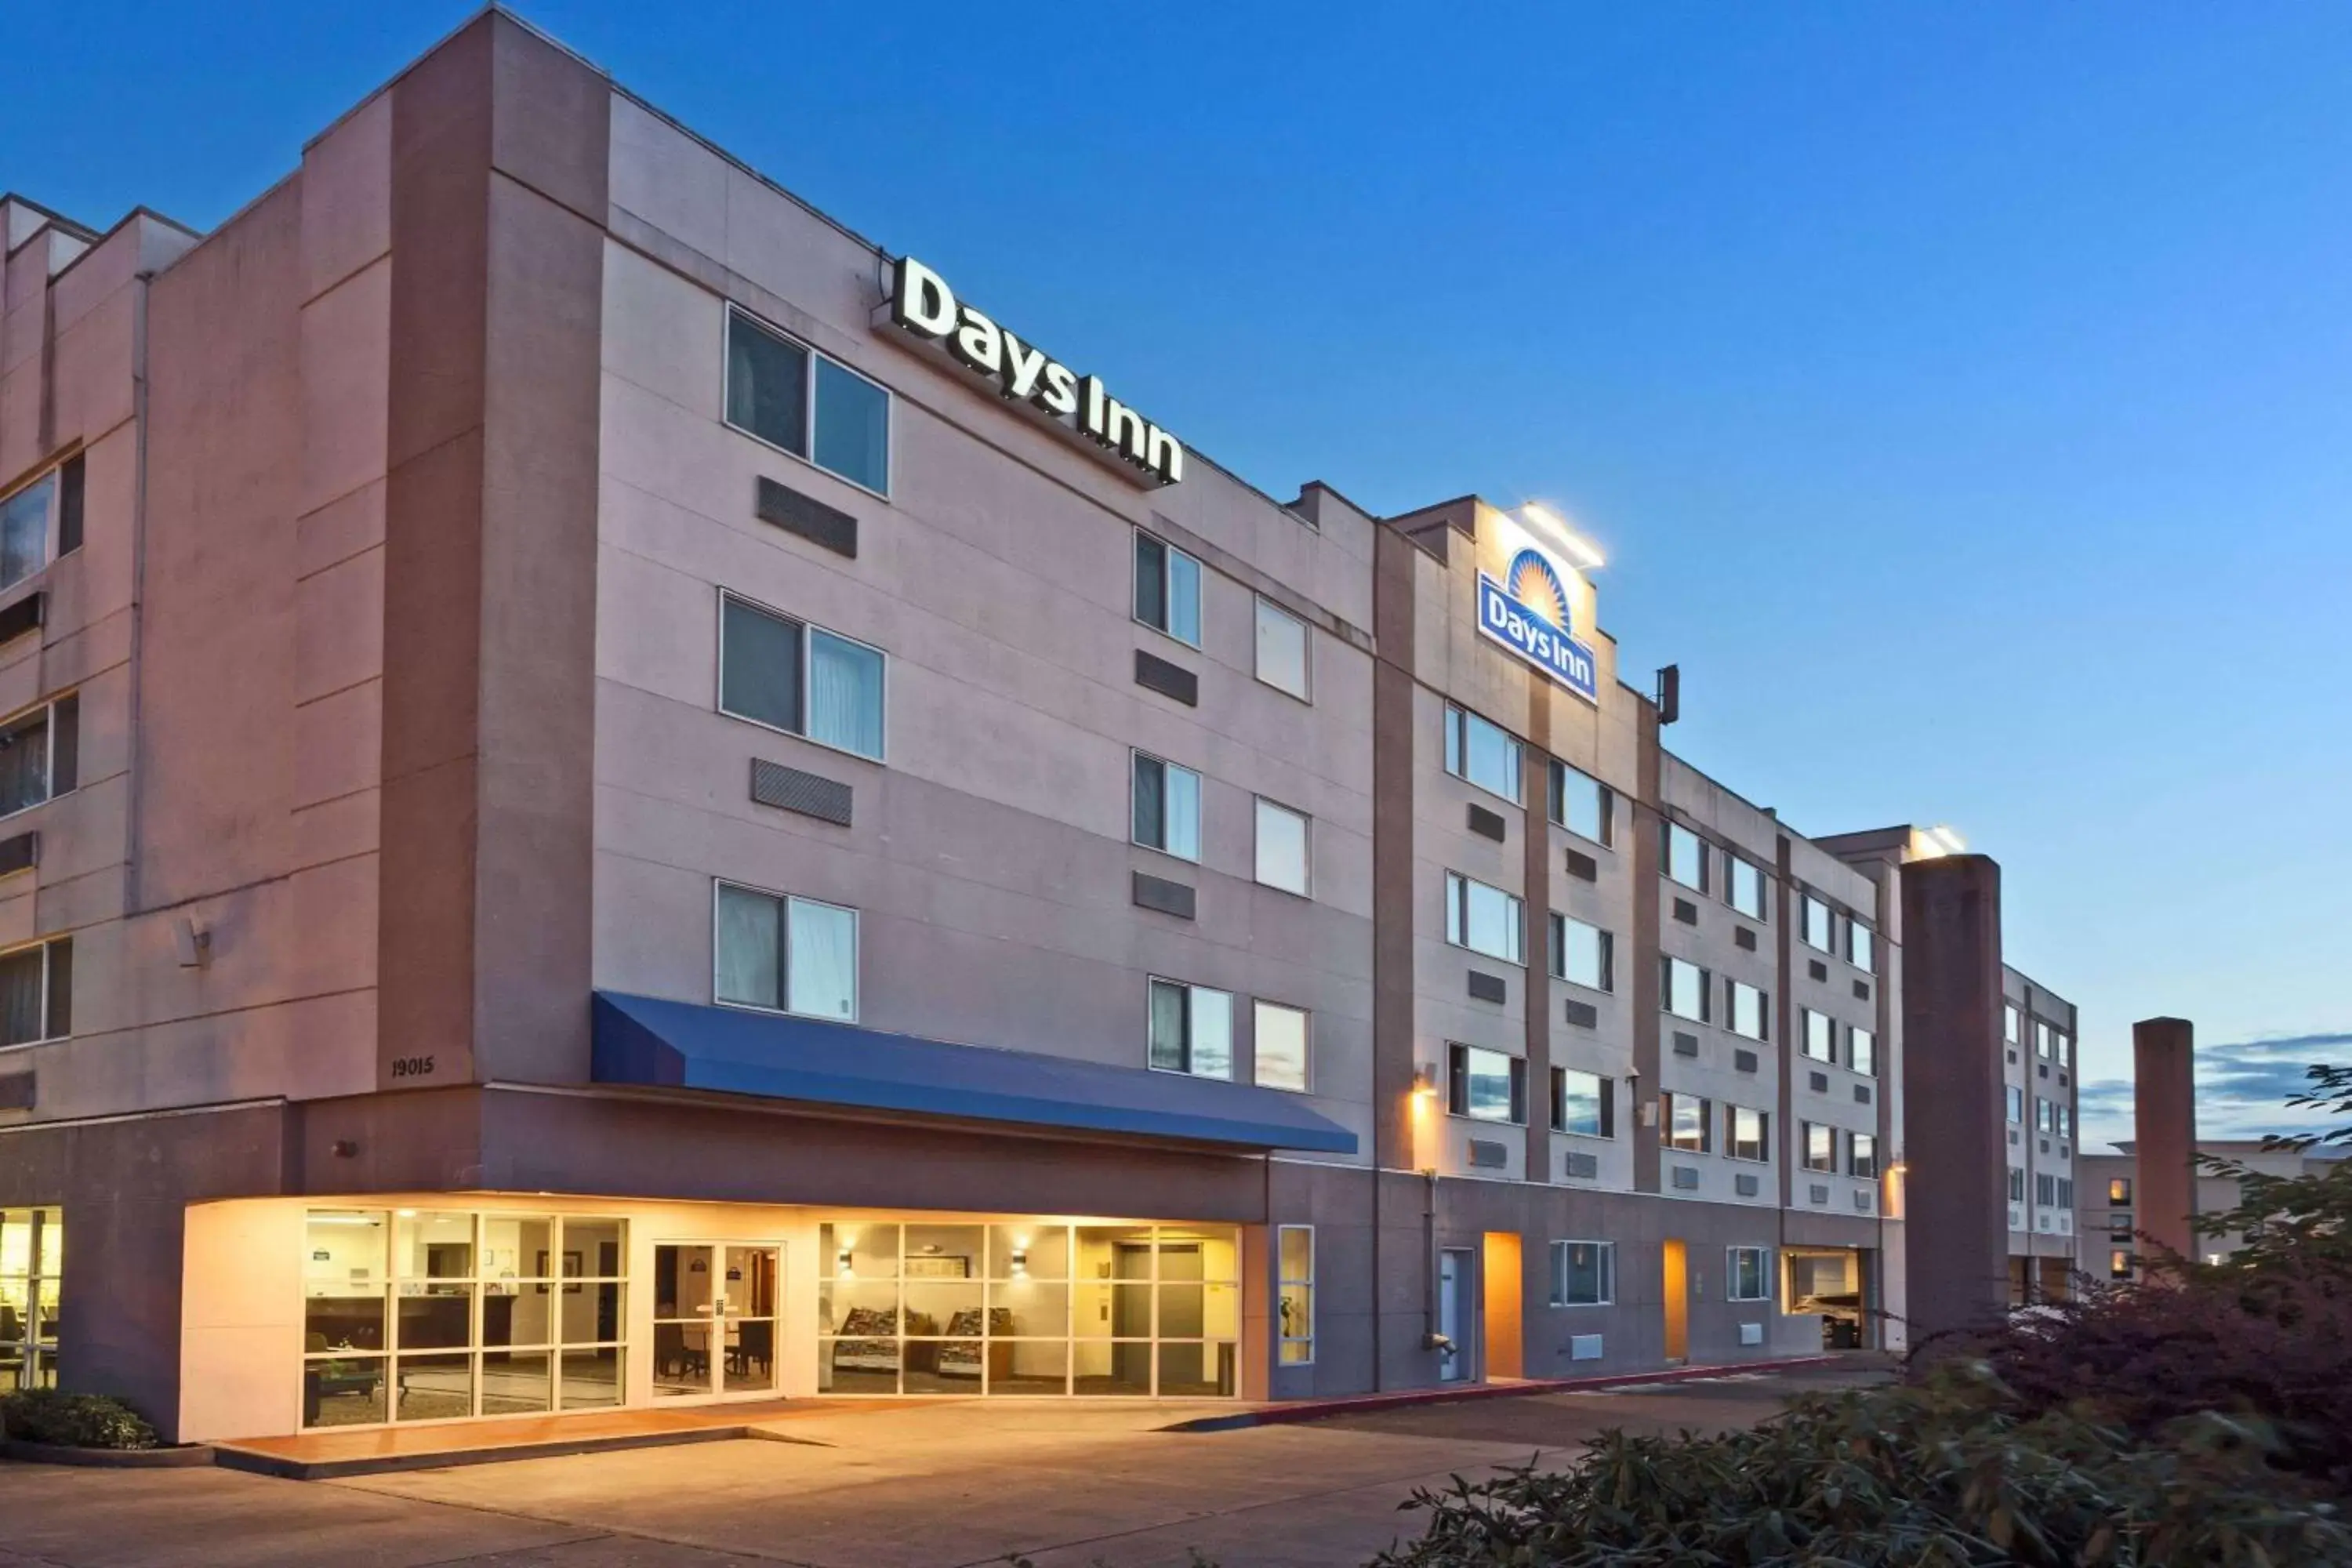 Property Building in Days Inn by Wyndham Seatac Airport